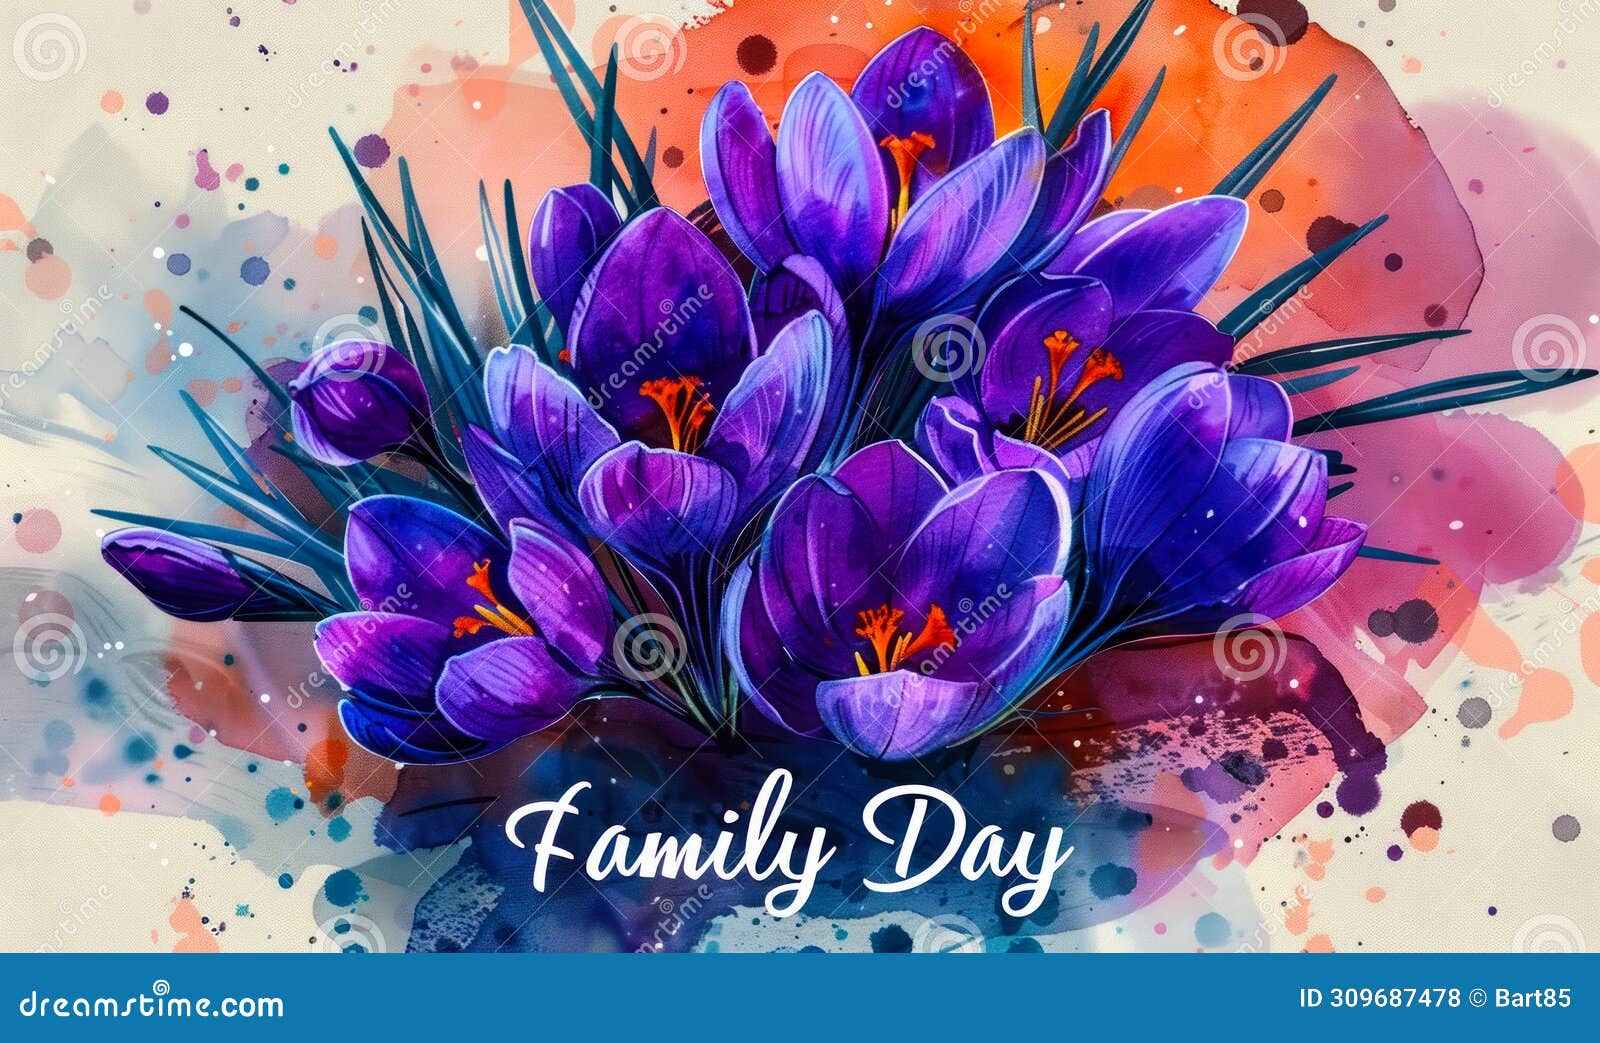 artistic  of vibrant purple crocuses with family day lettering, celebrating familial bonds through the beauty of